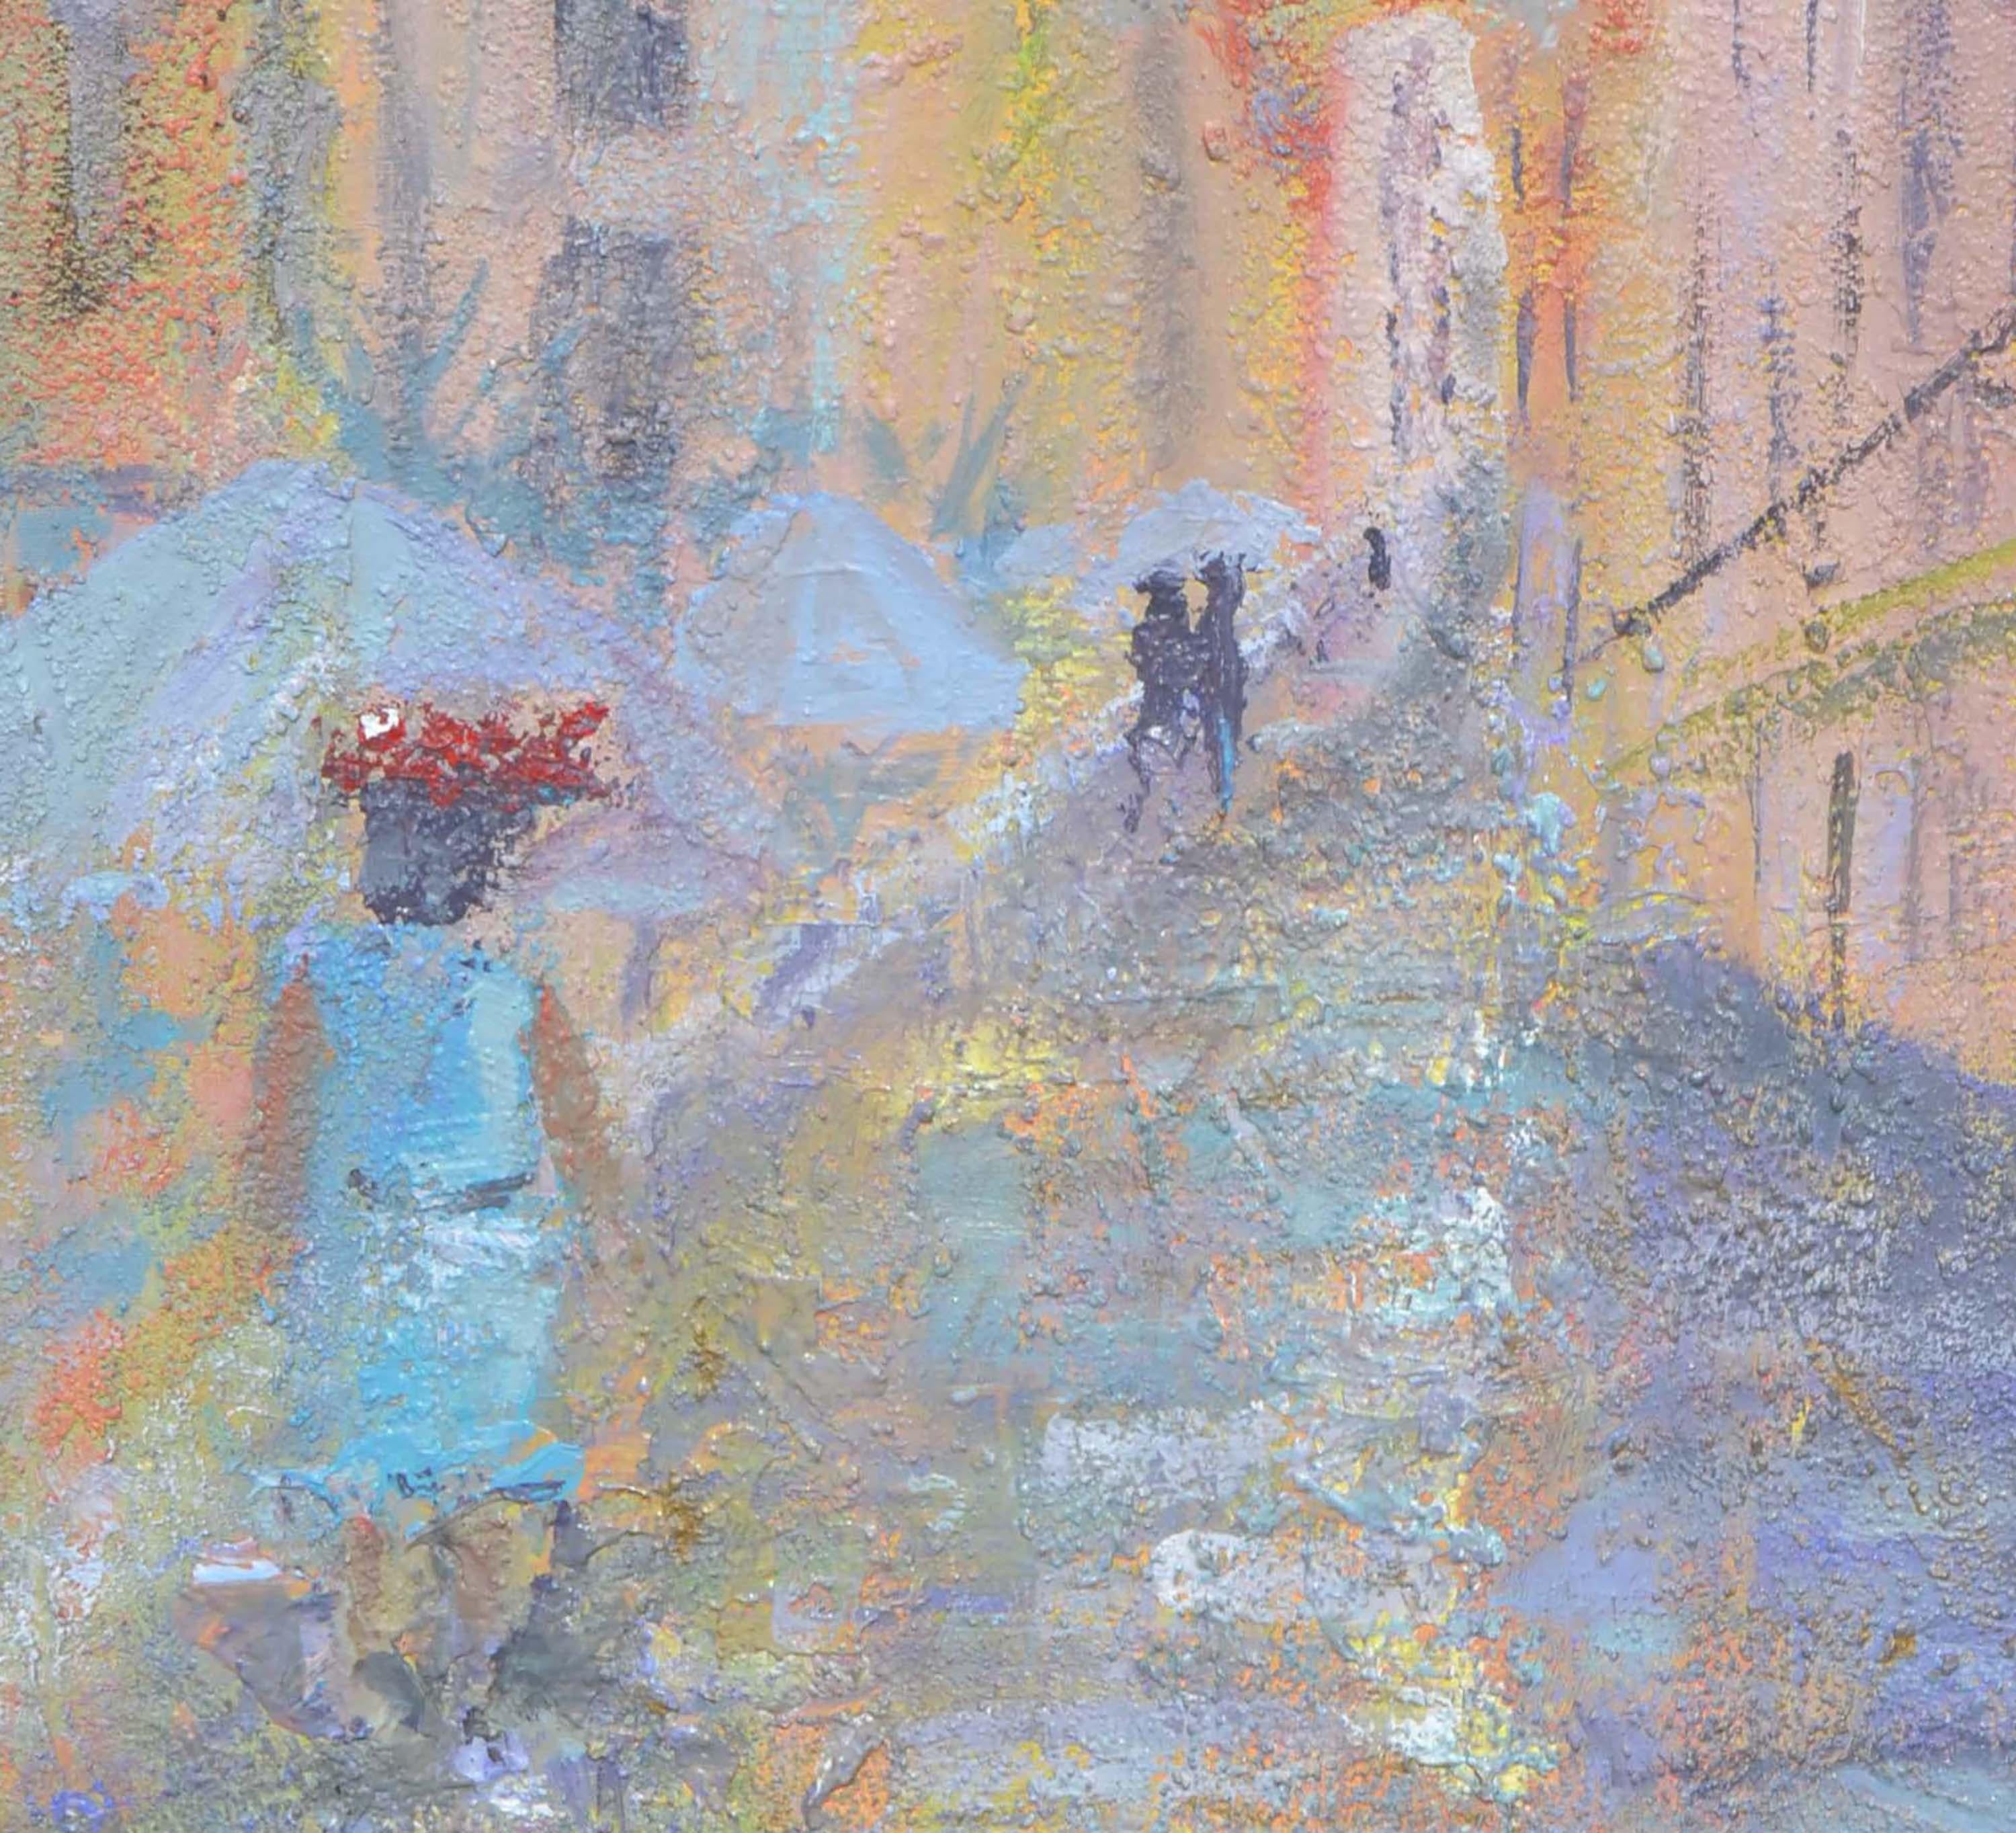 French Street Scene Landscape - American Impressionist Painting by Sandra LaBoue-Erba